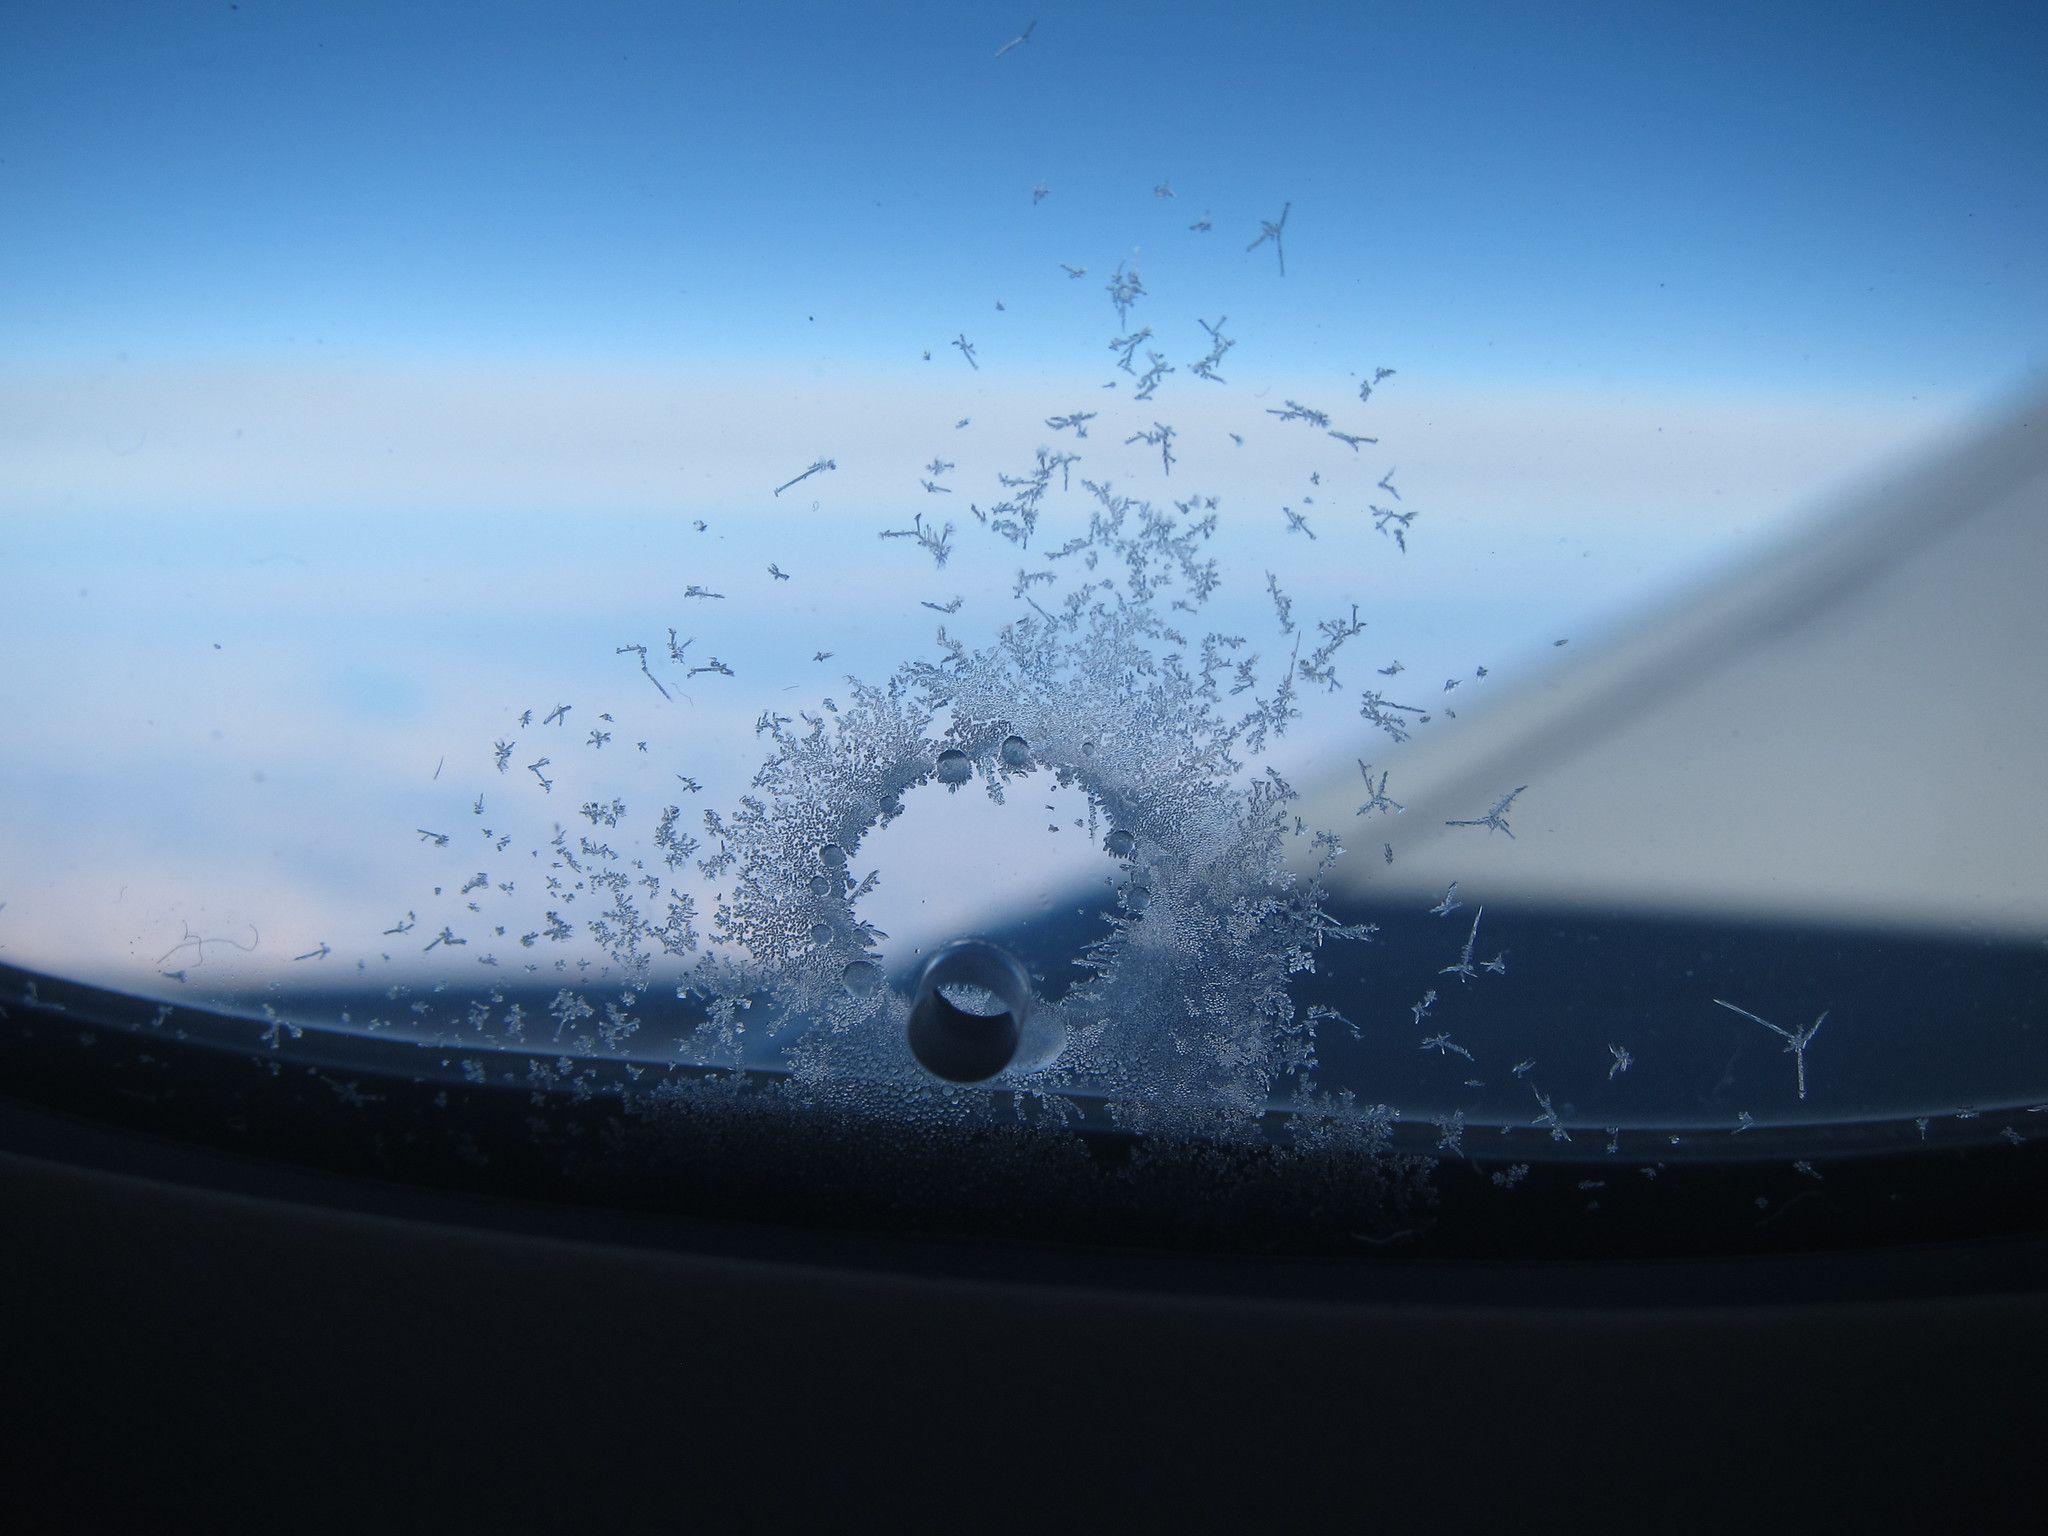 Small bleed hole in an aircraft window.